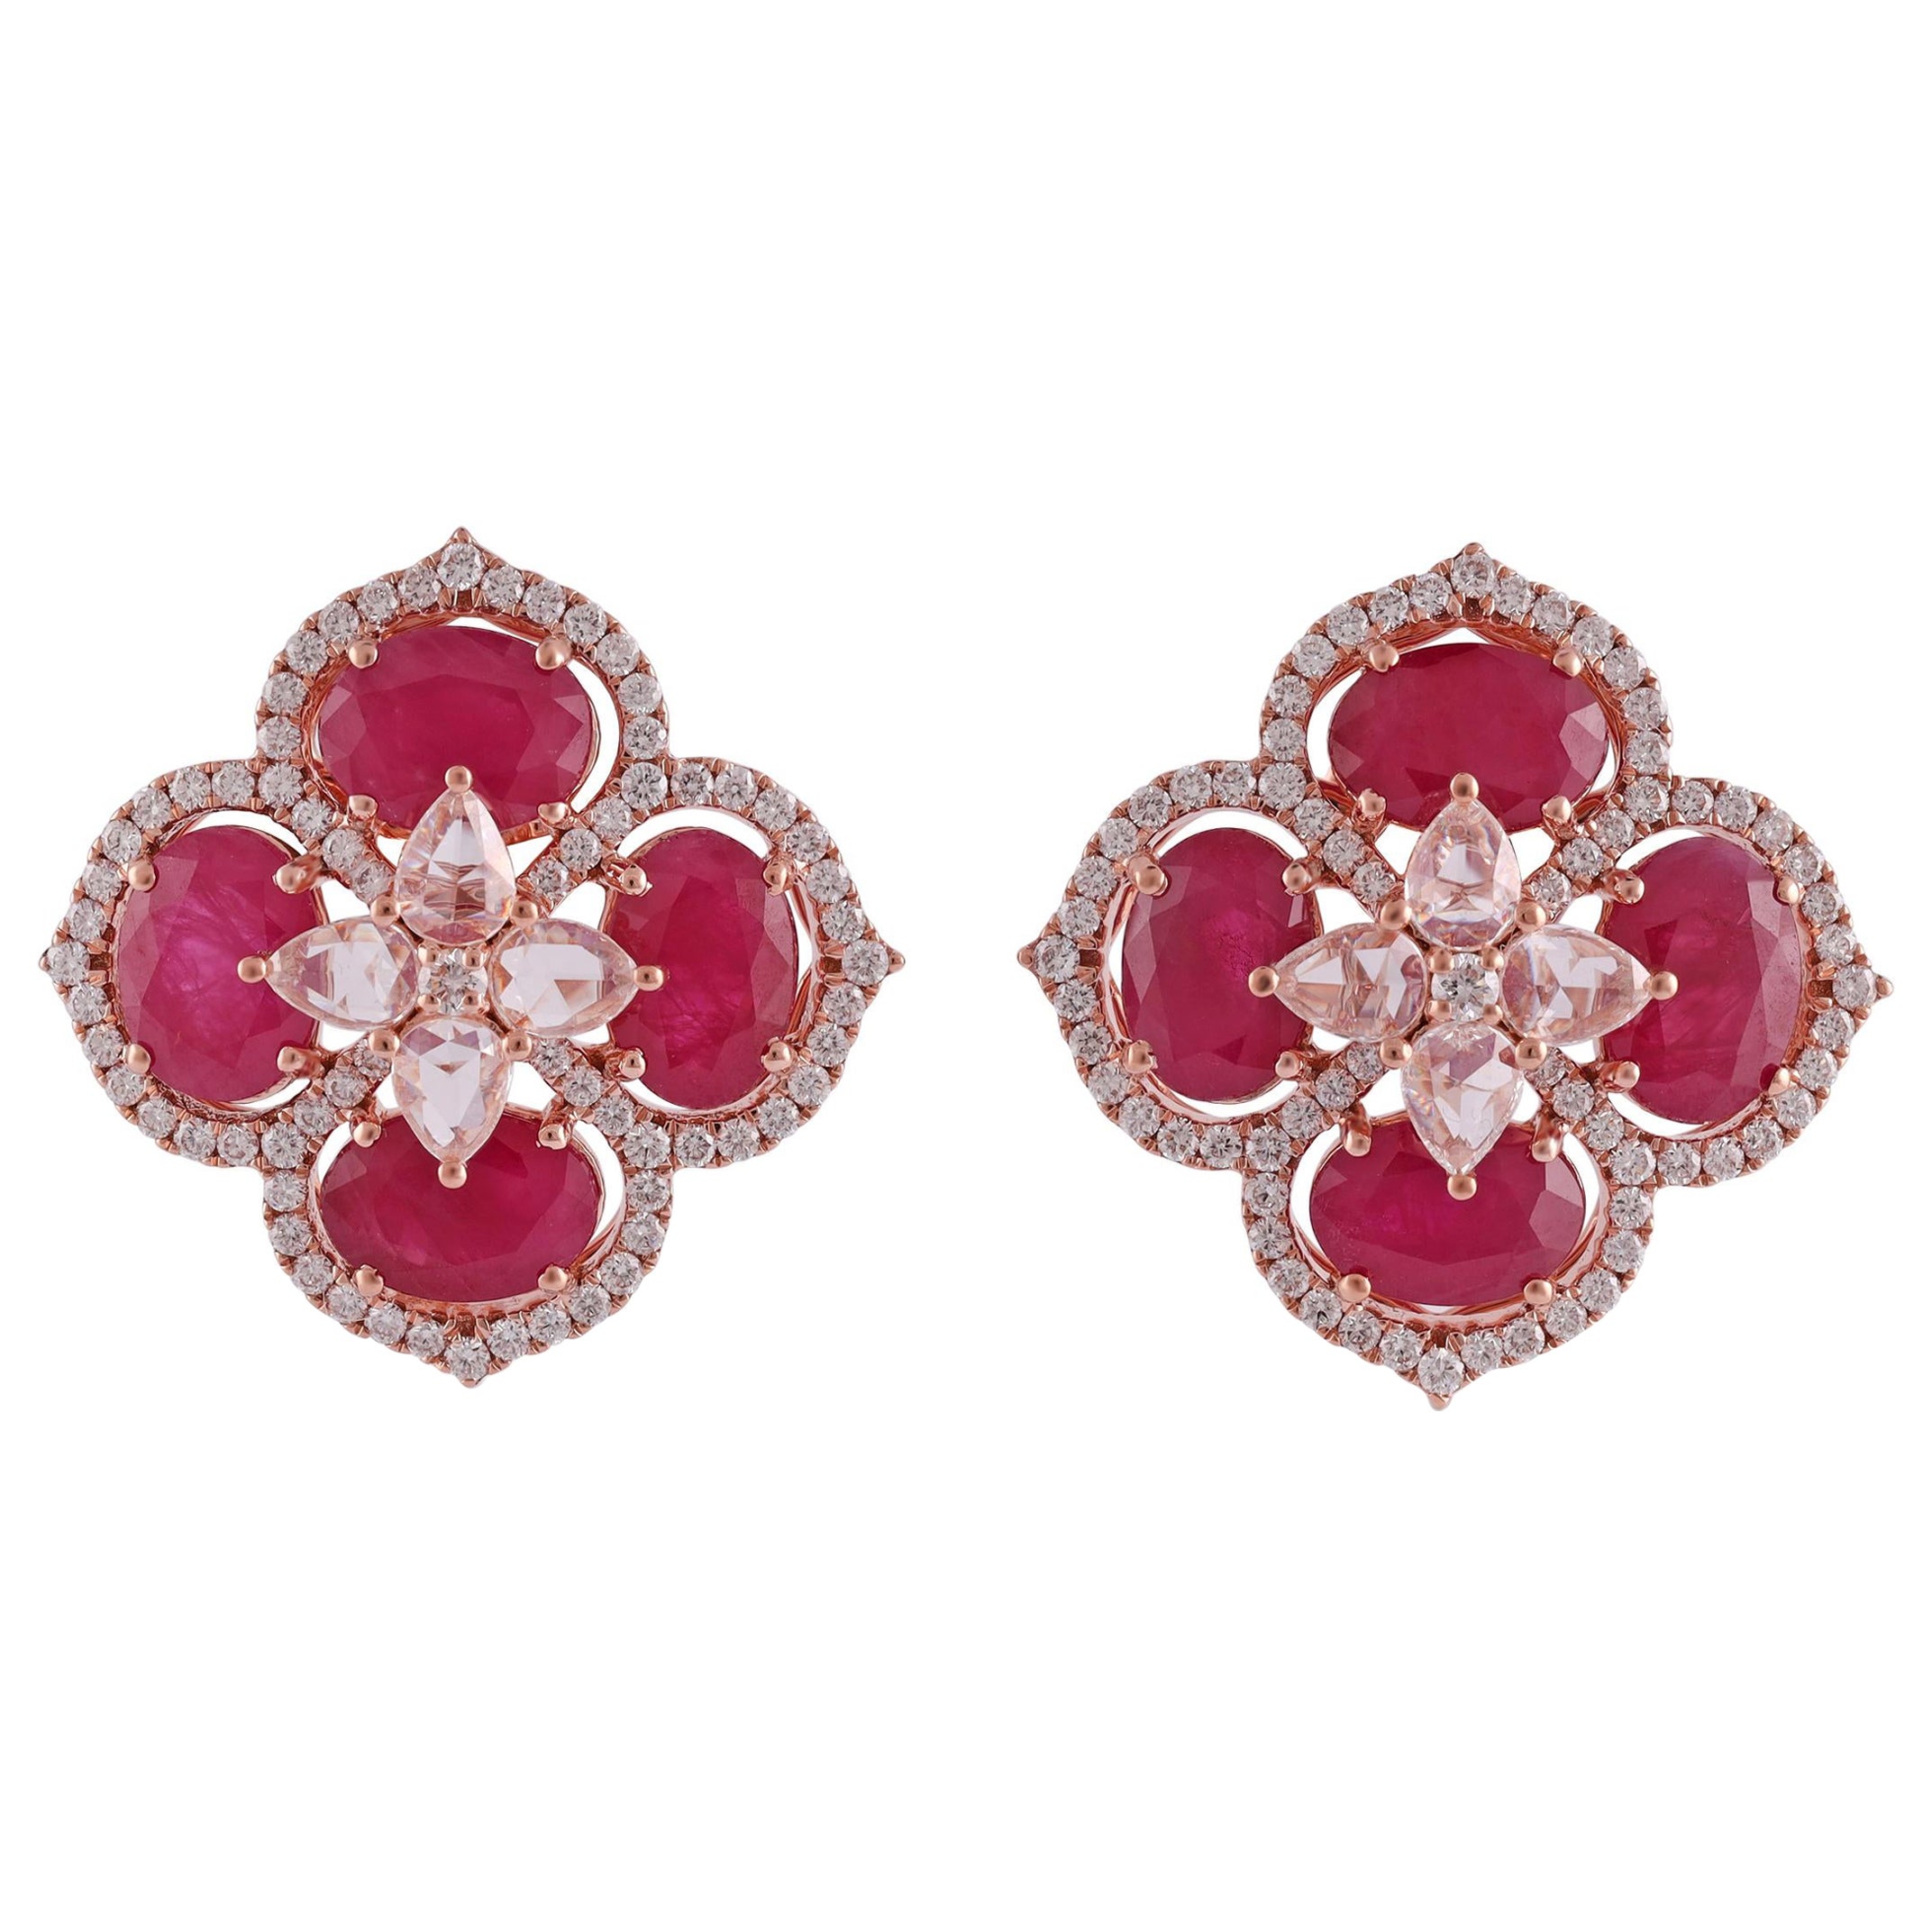 7.44 Carat Ruby Earrings in Rose Gold with Diamonds